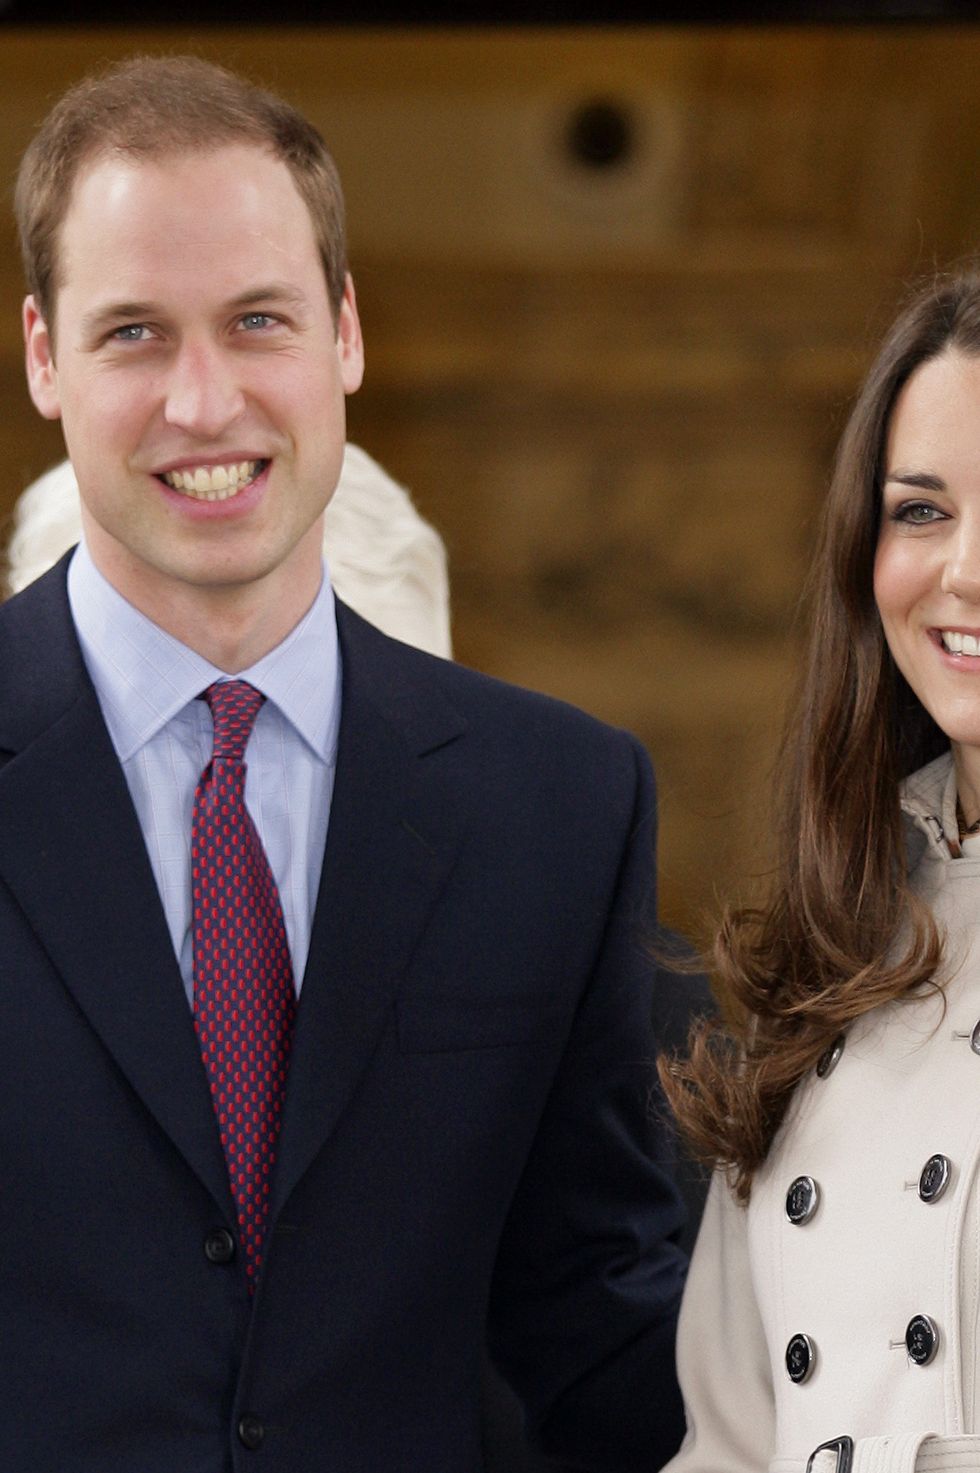 belfast, united kingdom march 08 embargoed for publication in uk newspapers until 48 hours after create date and time prince william and kate middleton stand on the steps of city hall during a visit to belfast on march 8, 2011 in belfast, northern ireland photo by indigogetty images